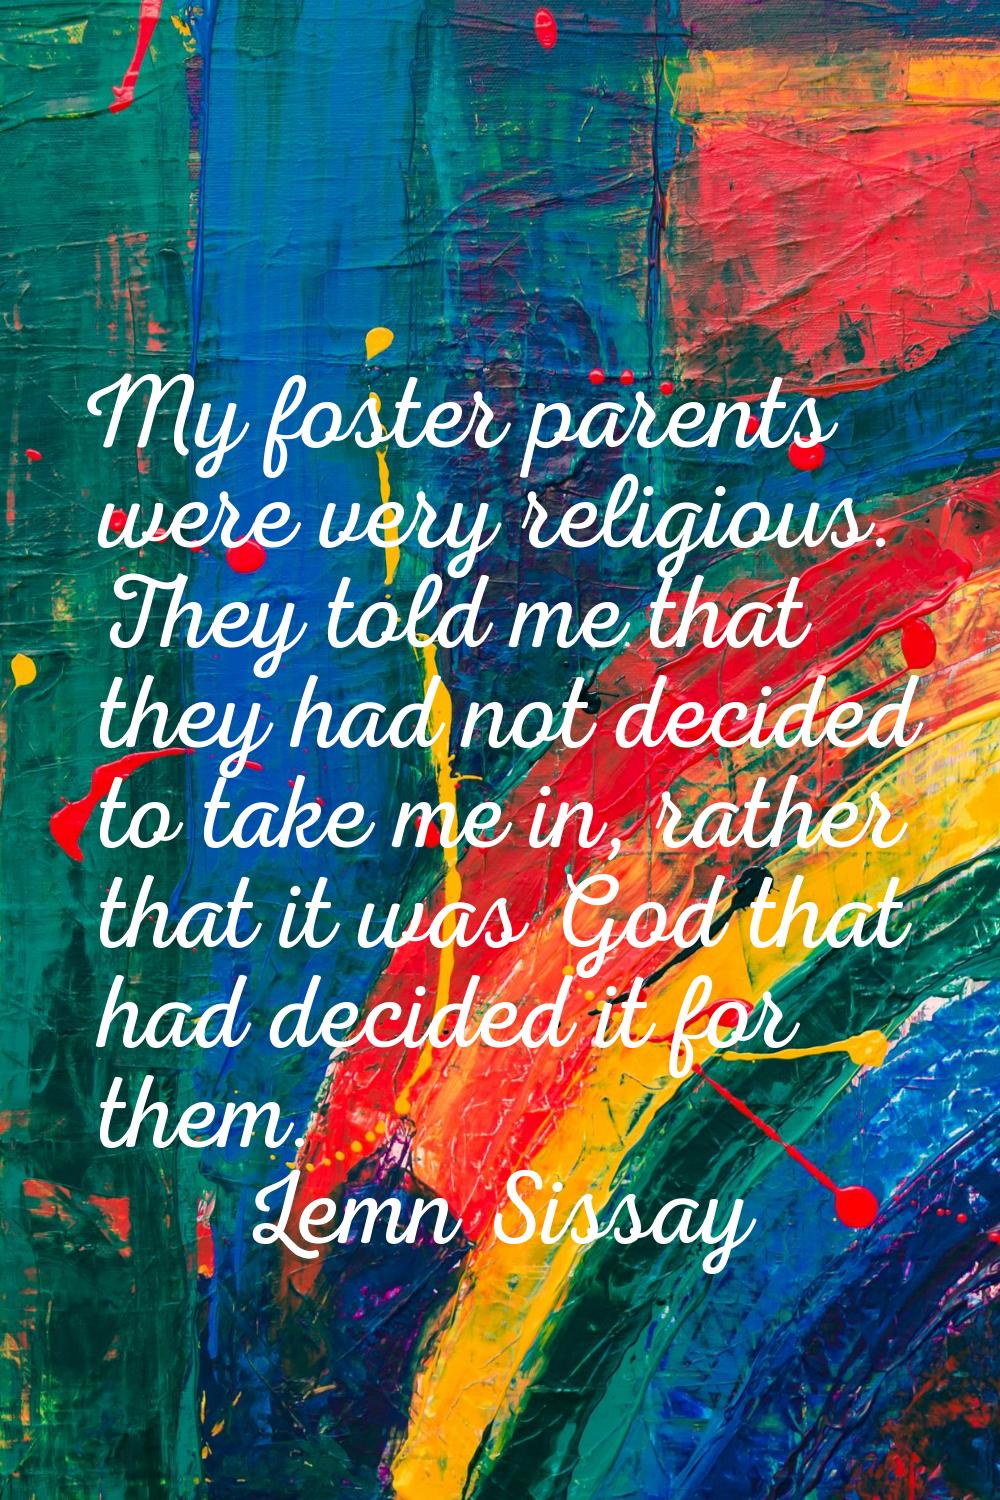 My foster parents were very religious. They told me that they had not decided to take me in, rather